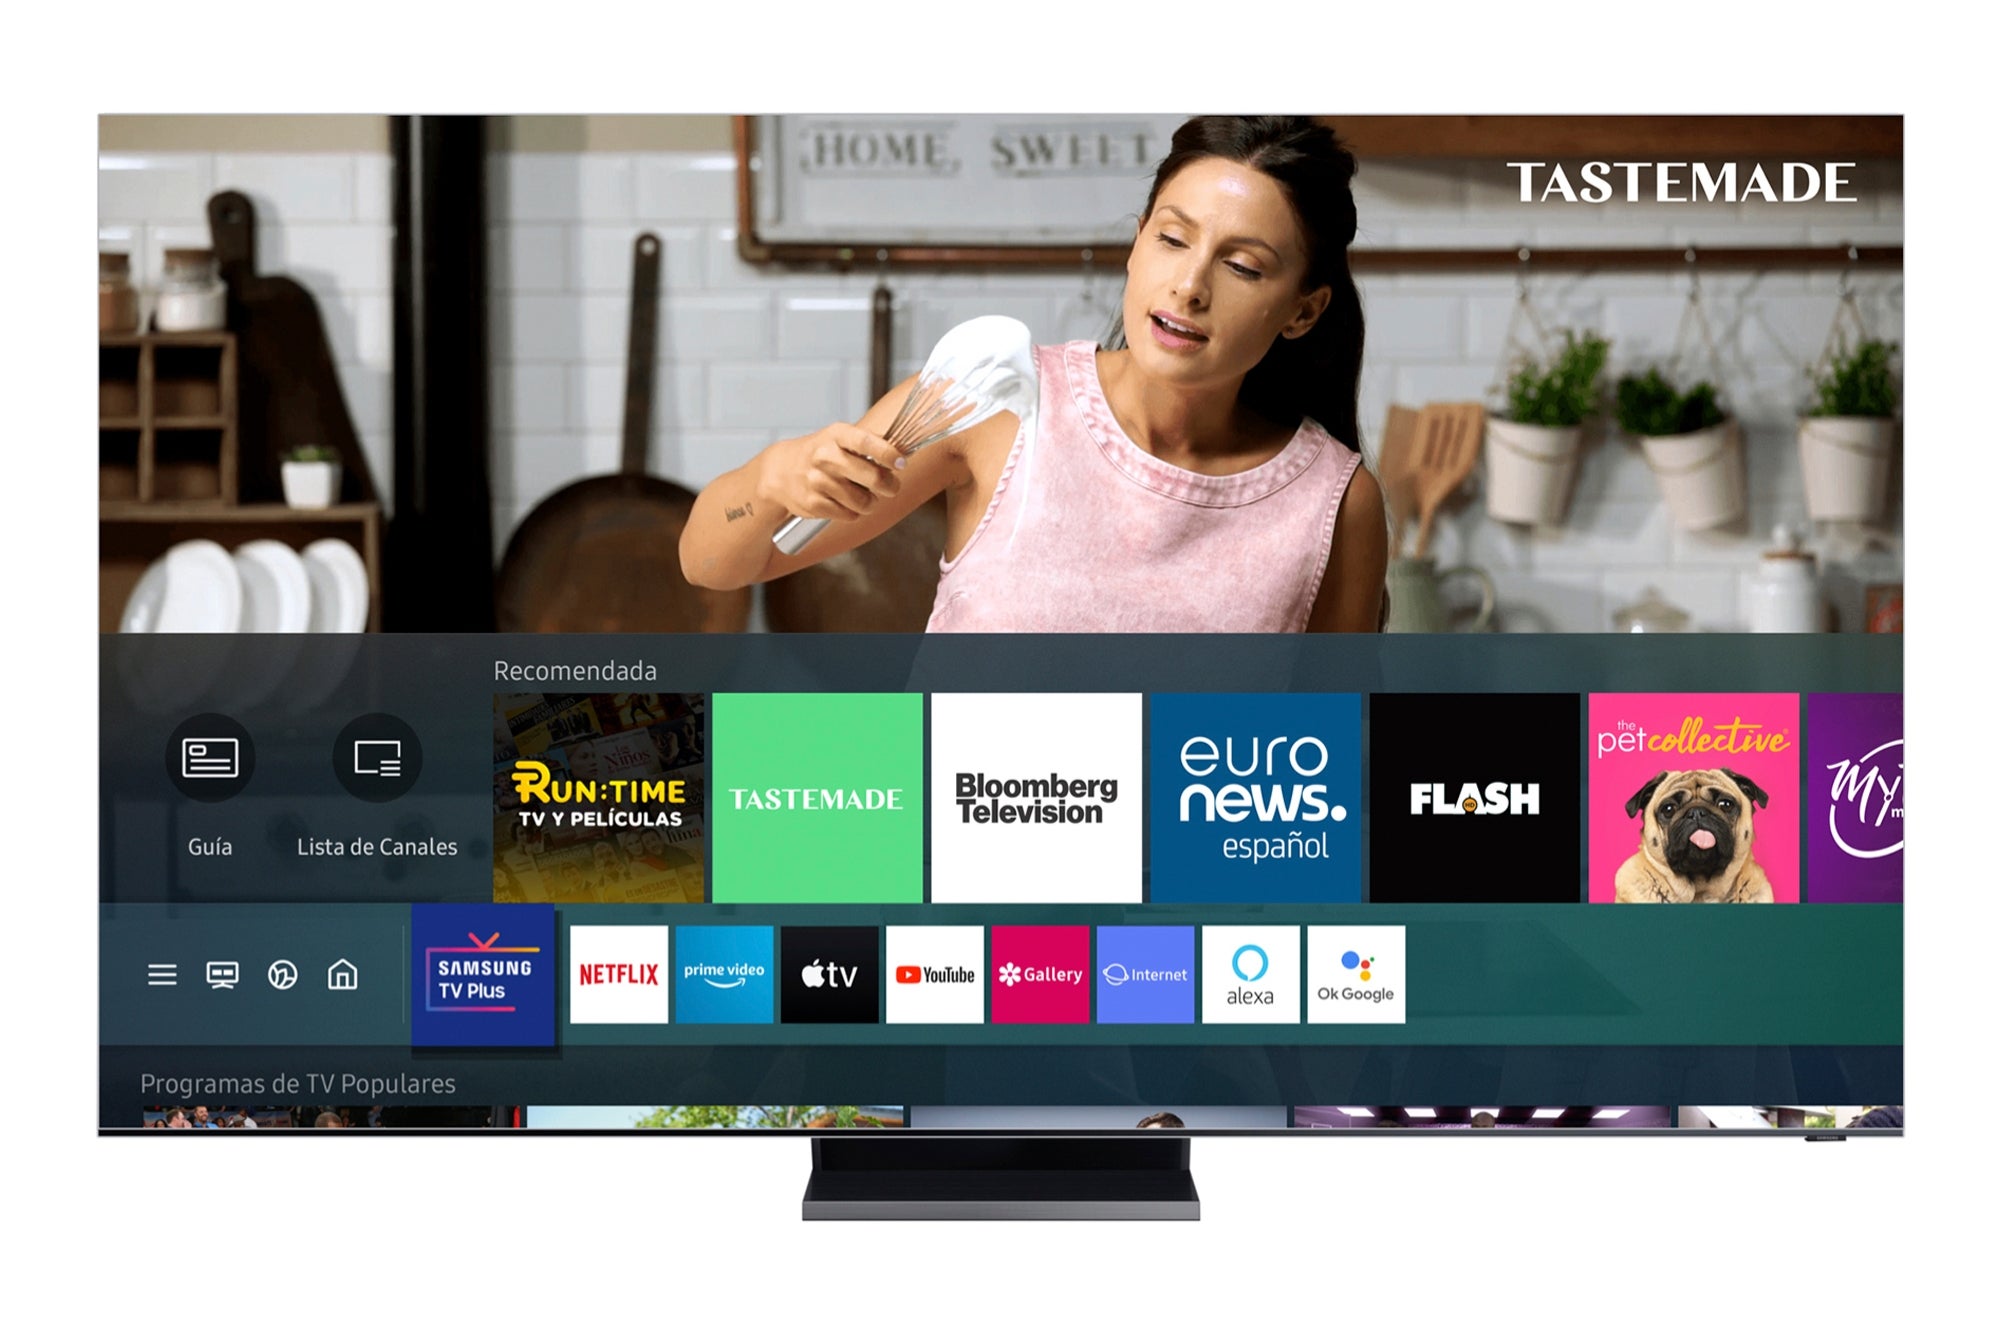 Samsung TV Plus streaming arrives in Mexico, Samsung's free Netflix